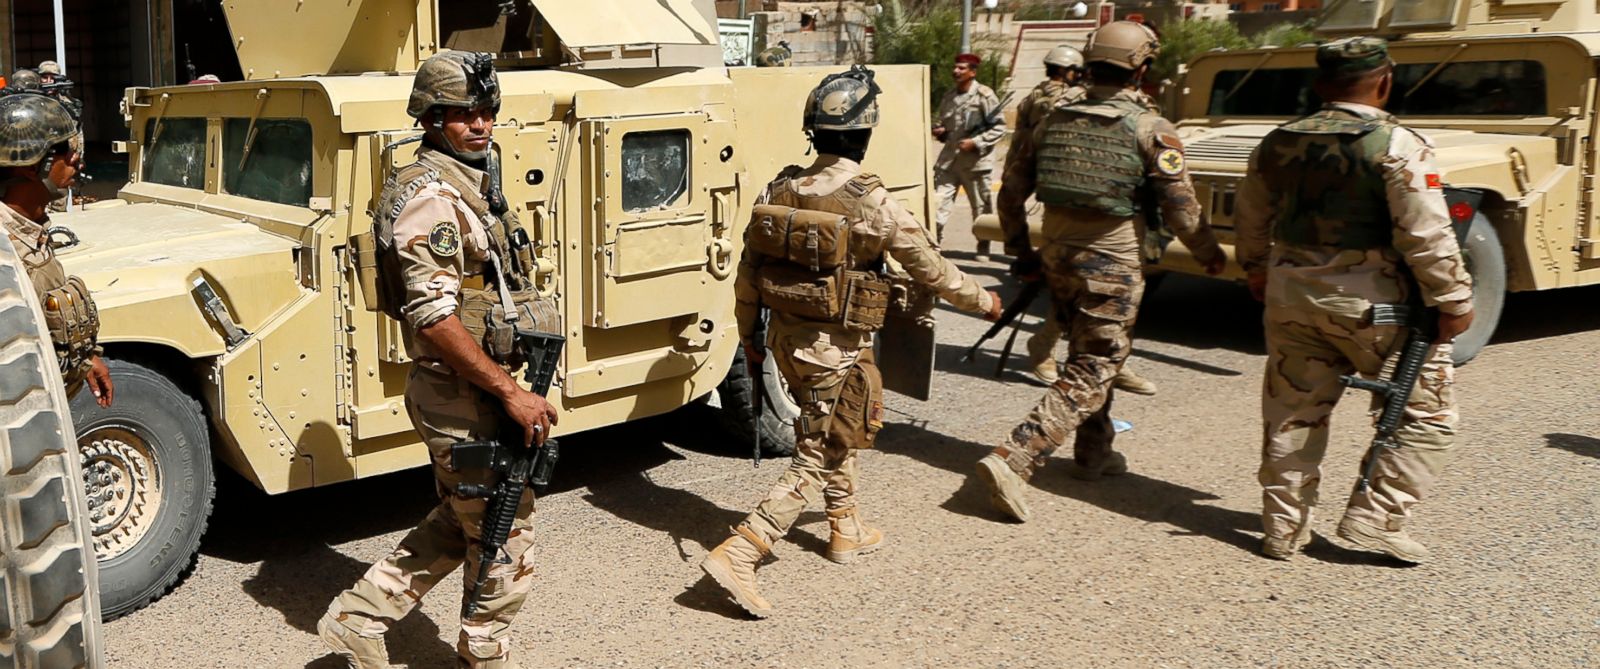 Iraqi Troops Push Into Center of Fallujah in Fight Against ISIS